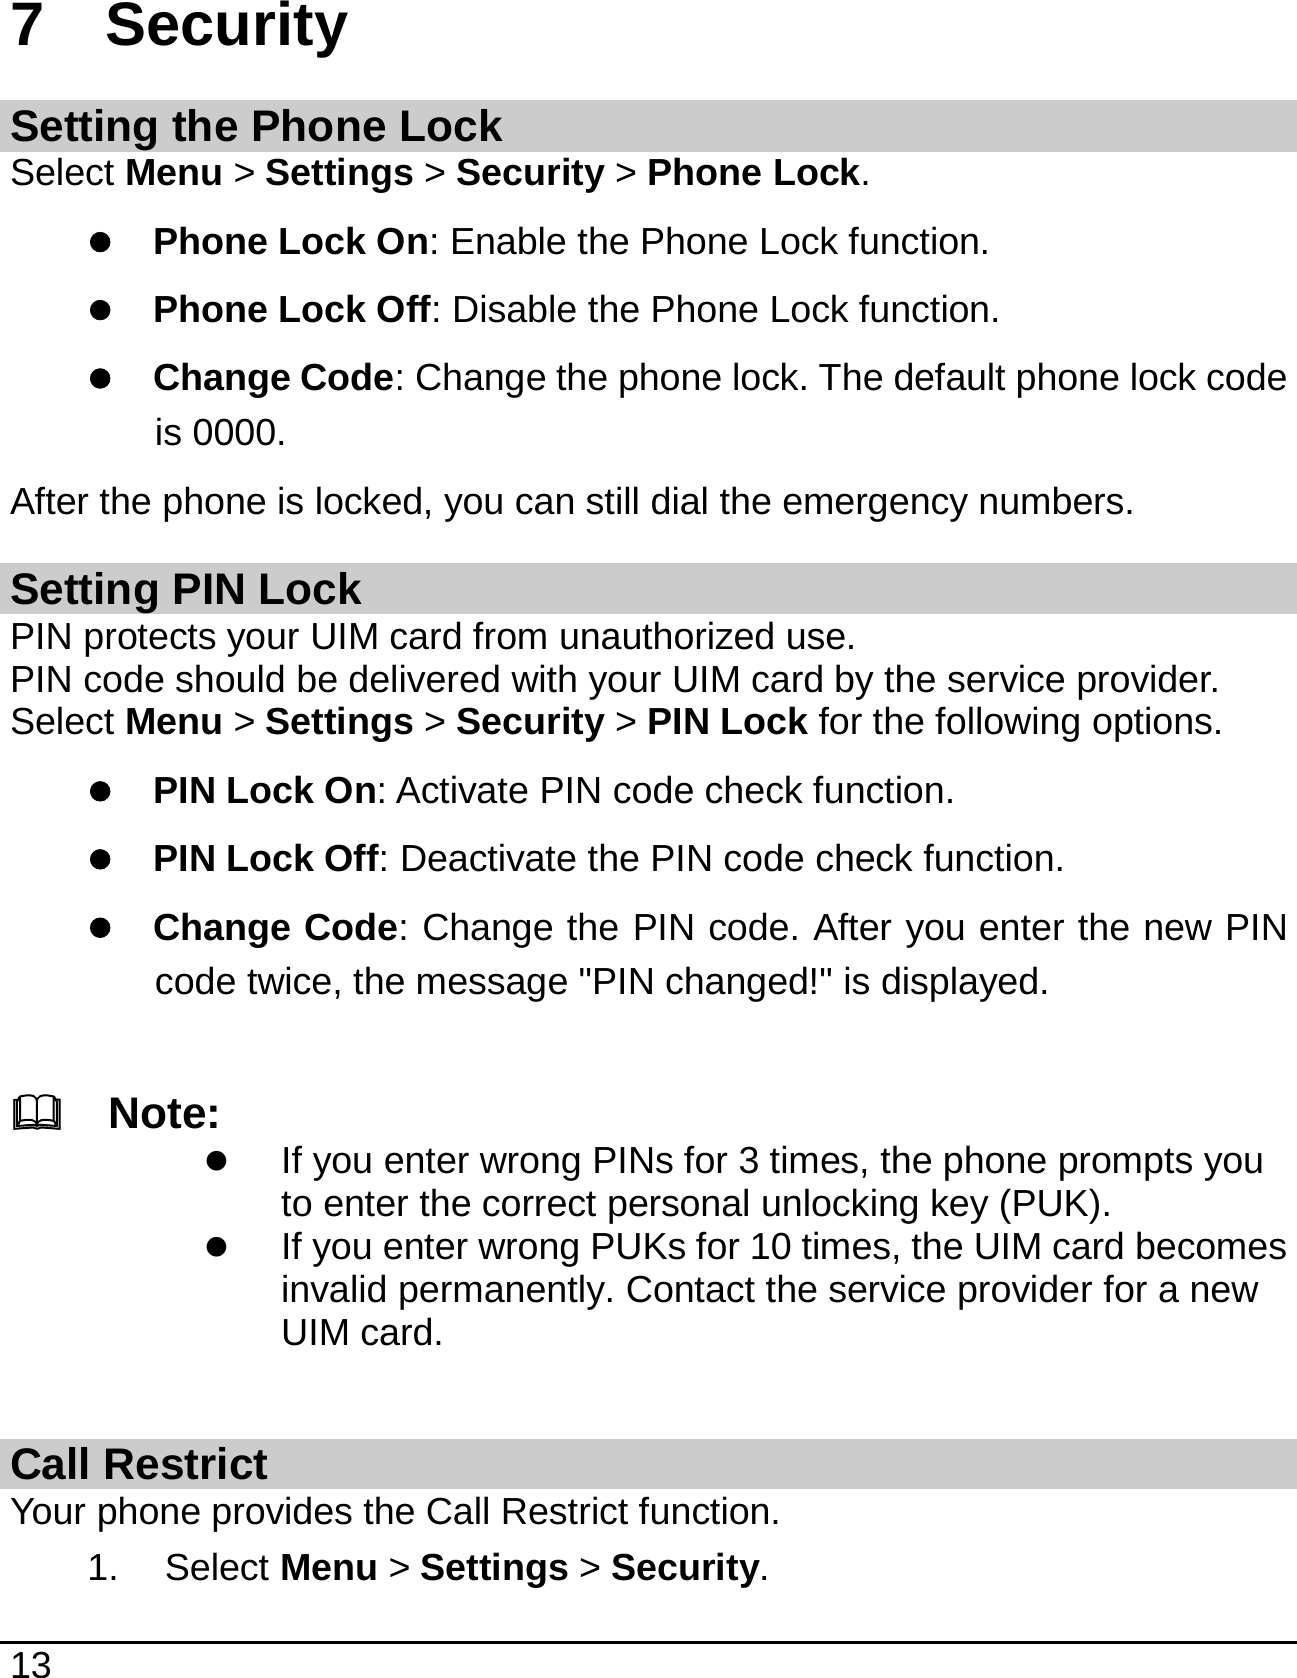   13  7  Security Setting the Phone Lock Select Menu &gt; Settings &gt; Security &gt; Phone Lock. z Phone Lock On: Enable the Phone Lock function.   z Phone Lock Off: Disable the Phone Lock function. z Change Code: Change the phone lock. The default phone lock code is 0000. After the phone is locked, you can still dial the emergency numbers. Setting PIN Lock PIN protects your UIM card from unauthorized use. PIN code should be delivered with your UIM card by the service provider. Select Menu &gt; Settings &gt; Security &gt; PIN Lock for the following options. z PIN Lock On: Activate PIN code check function. z PIN Lock Off: Deactivate the PIN code check function. z Change Code: Change the PIN code. After you enter the new PIN code twice, the message &quot;PIN changed!&quot; is displayed.    Note: z If you enter wrong PINs for 3 times, the phone prompts you to enter the correct personal unlocking key (PUK). z If you enter wrong PUKs for 10 times, the UIM card becomes invalid permanently. Contact the service provider for a new UIM card.  Call Restrict Your phone provides the Call Restrict function. 1. Select Menu &gt; Settings &gt; Security. 